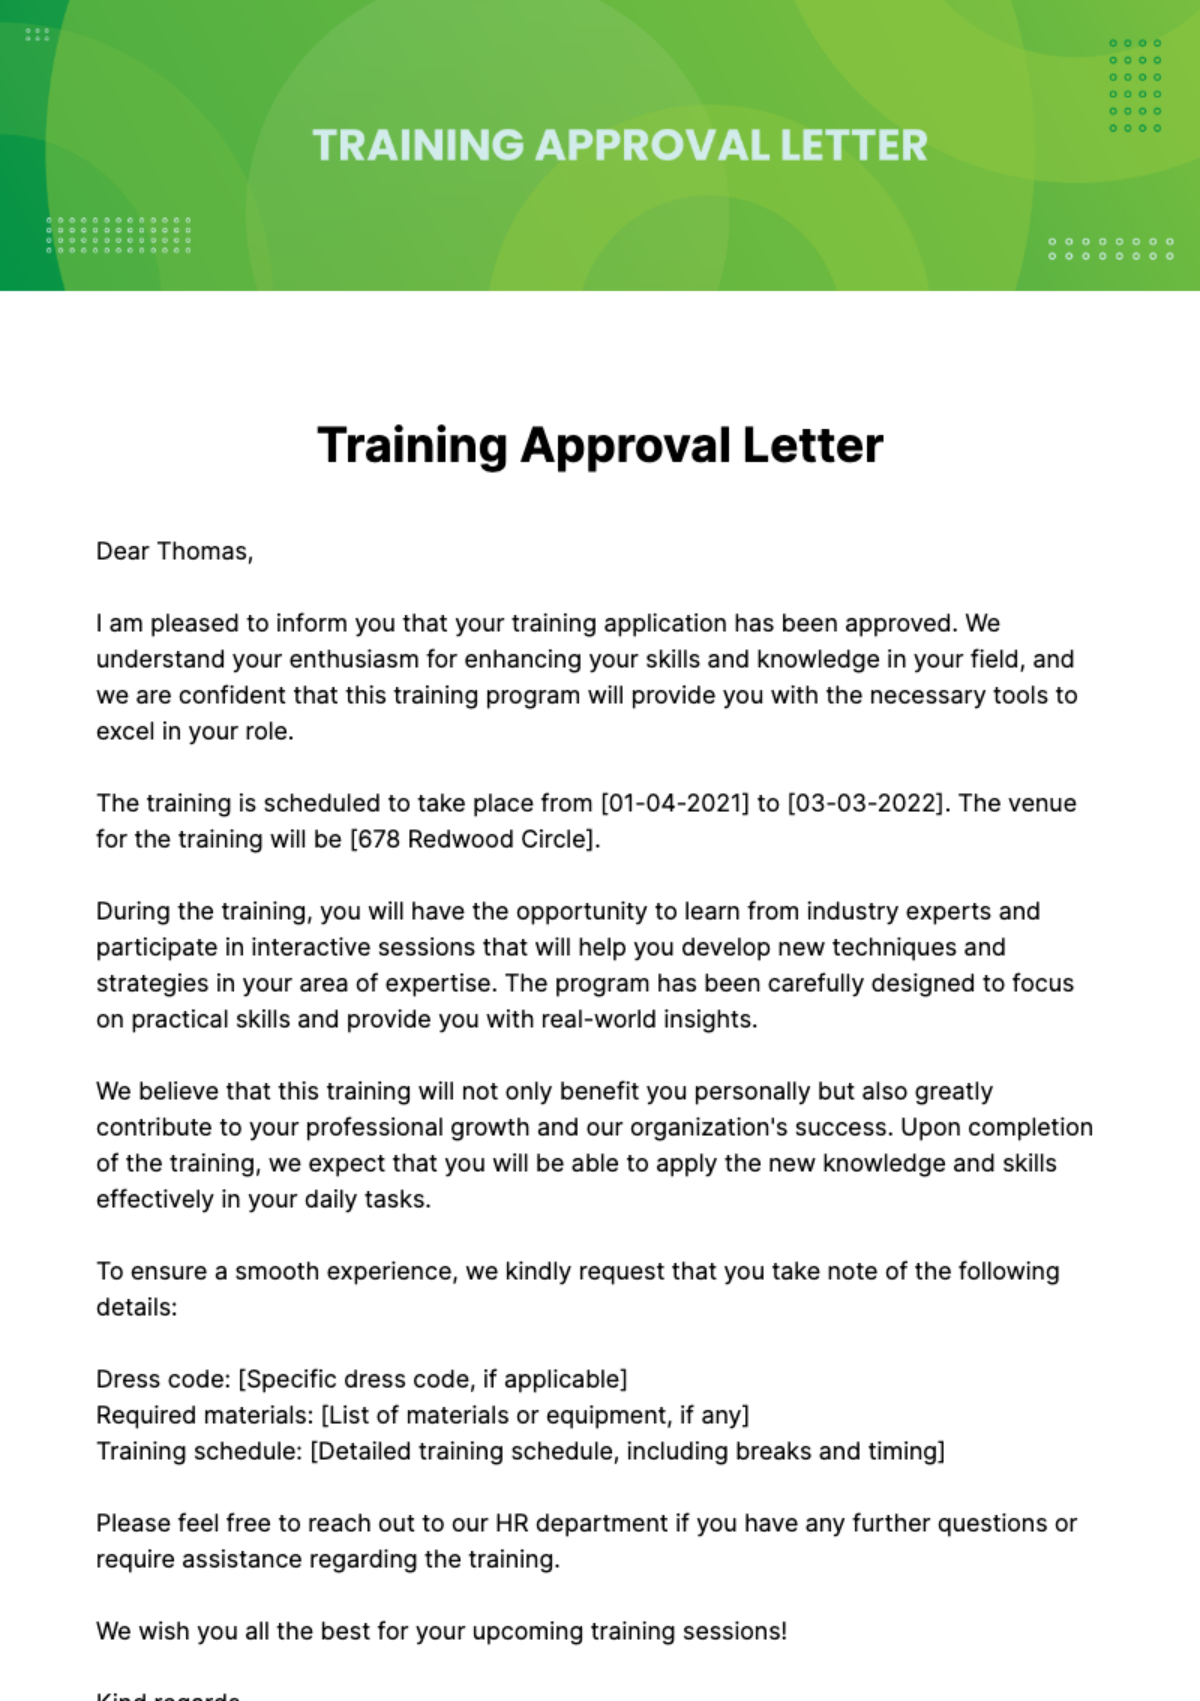 Training Approval Letter Template